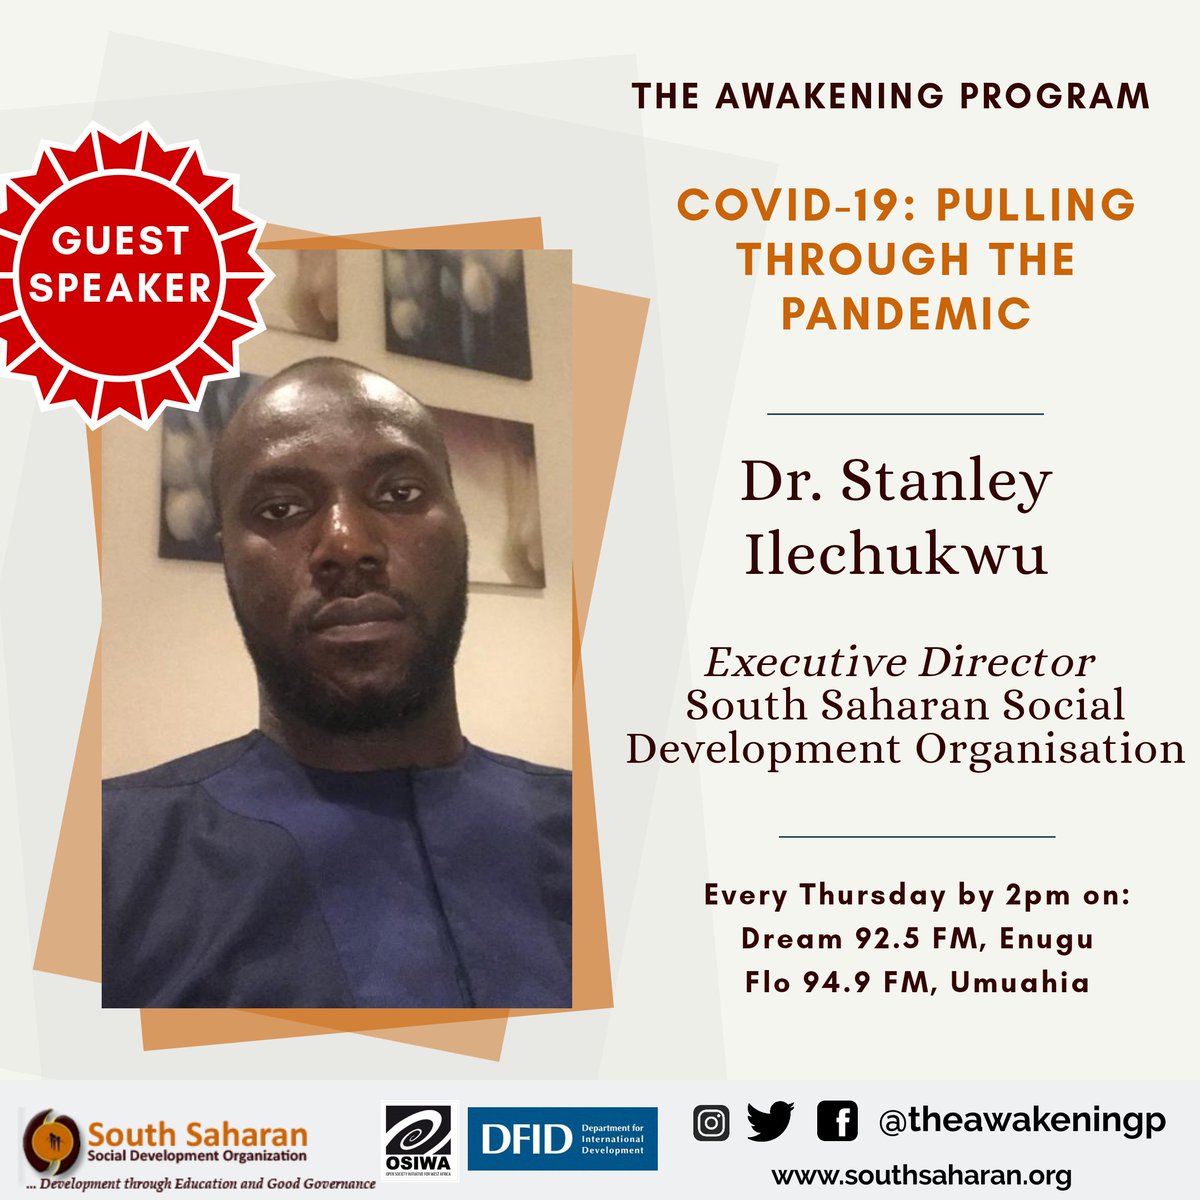 Our guest speaker for today's broadcast is Dr. Stanley Ilechukwu ( @Stan_MD), Executive Director, South Saharan Social Development Organisation